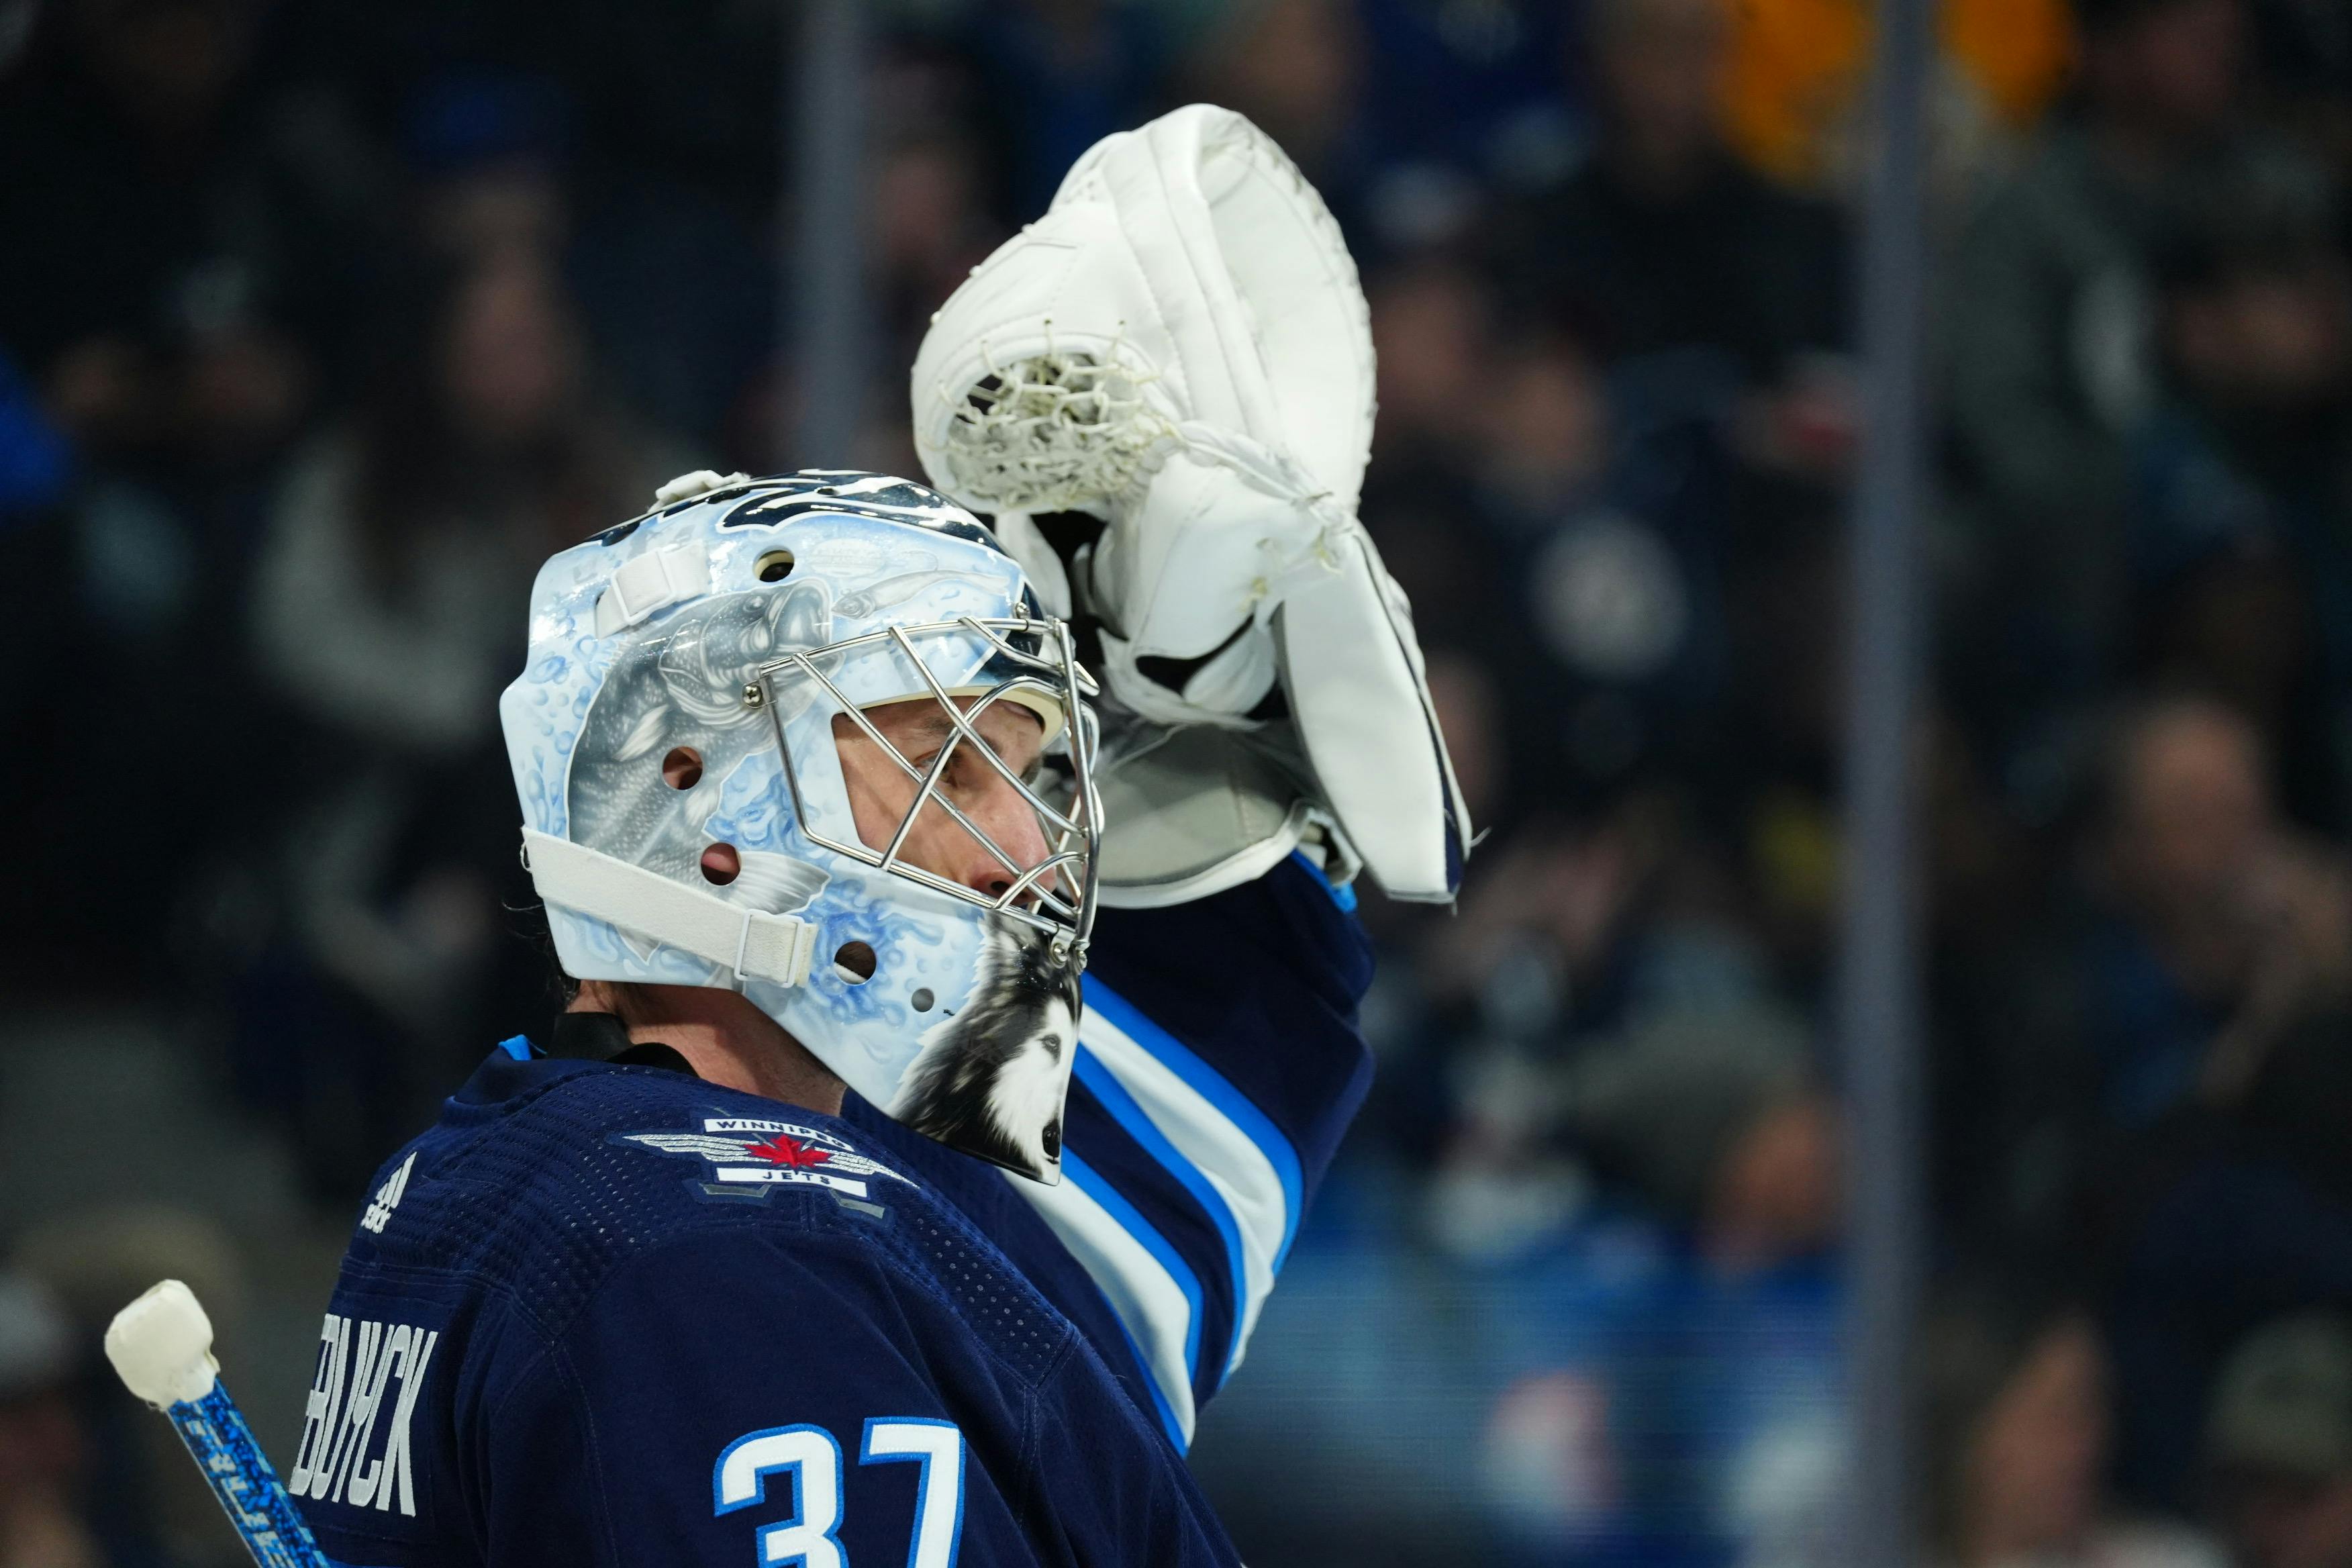 Jets' Connor Hellebuyck Named NHL's Third Star of the Month